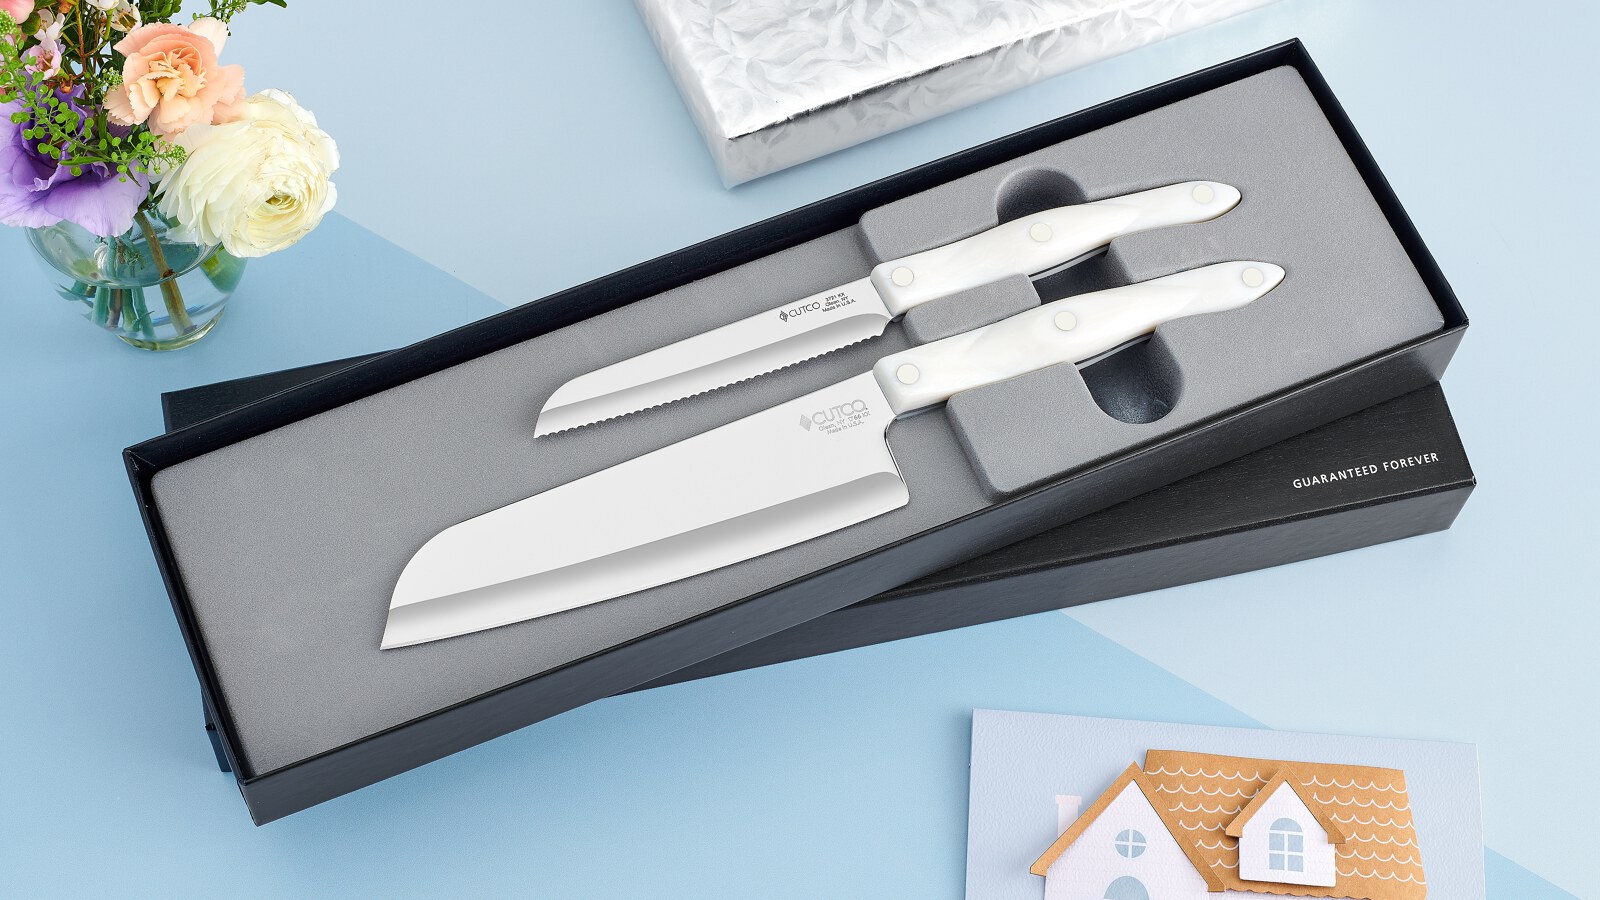 Santoku-Style Cook's Combo in Gift Box